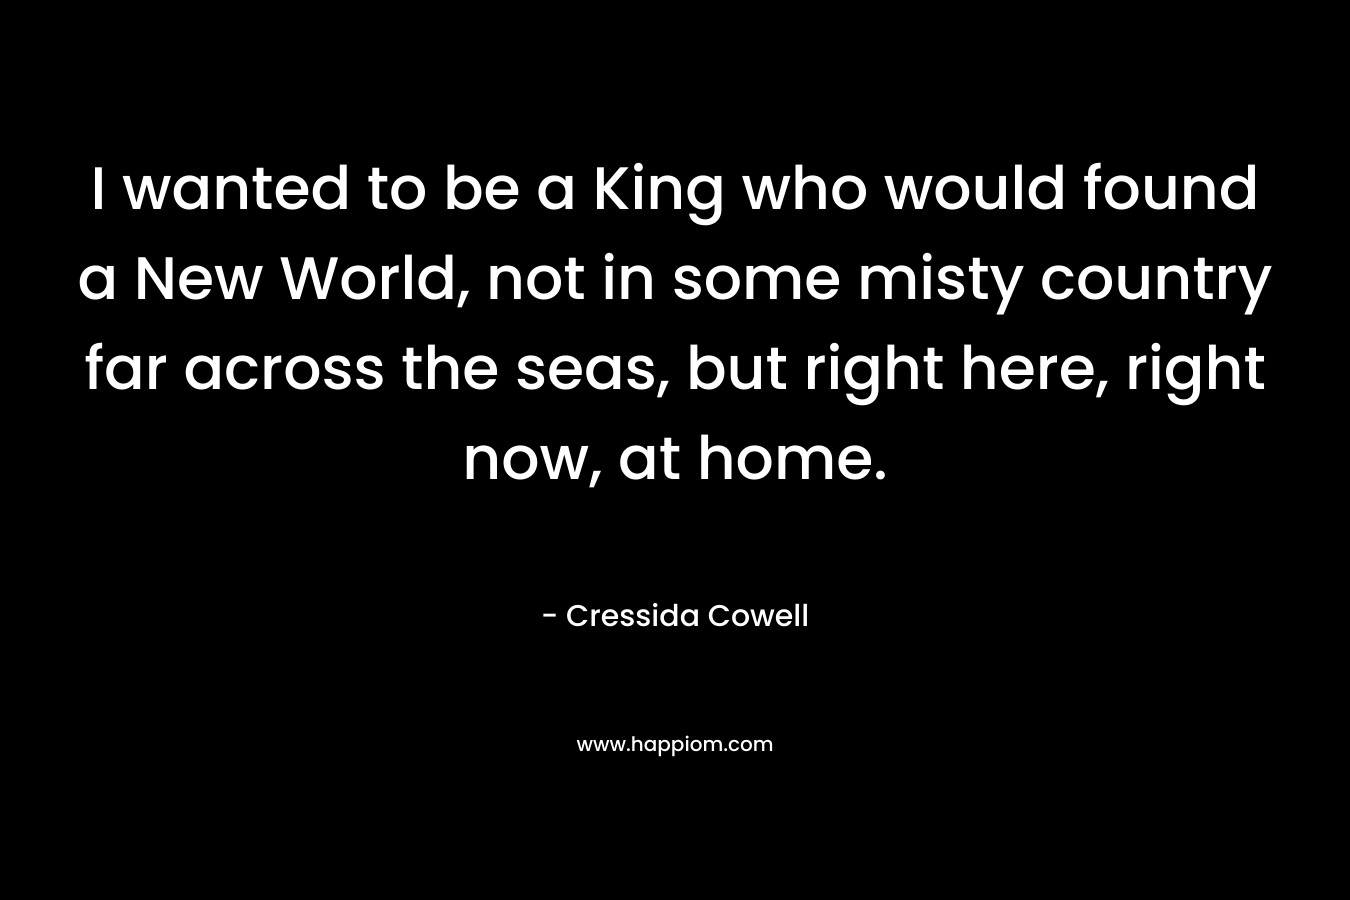 I wanted to be a King who would found a New World, not in some misty country far across the seas, but right here, right now, at home. – Cressida Cowell